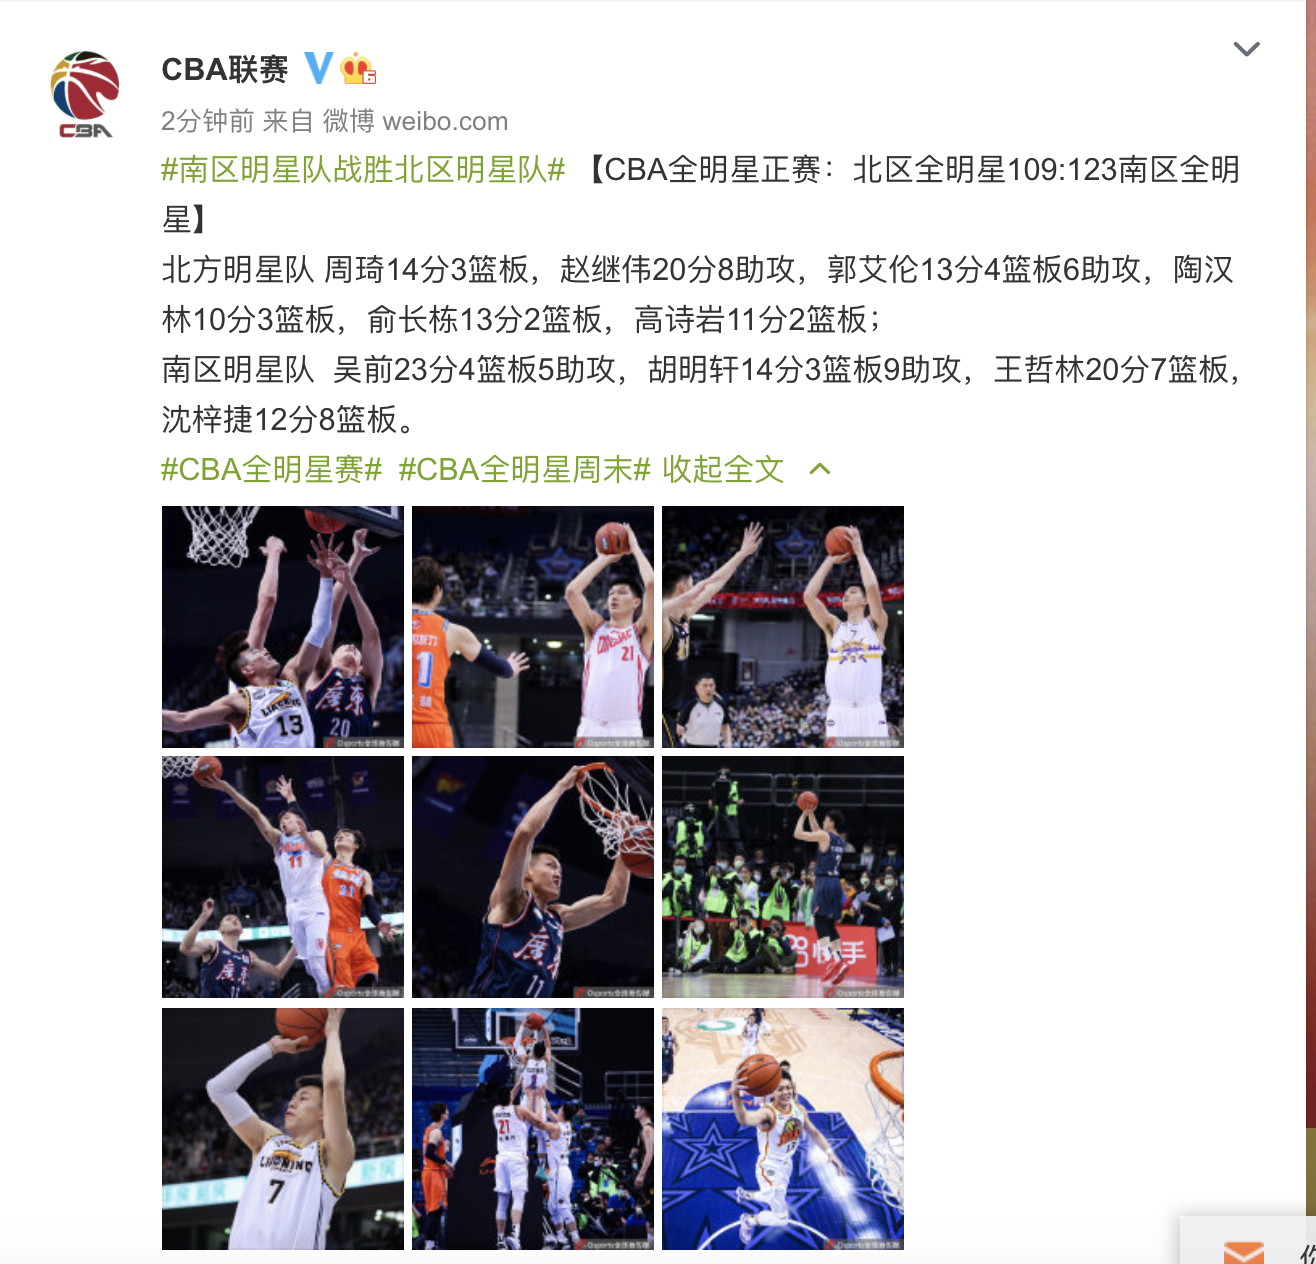 CBA complete star is surpassing: 109:1 of boreal area complete star23 south the area stars completely, wu Qian obtains MVP